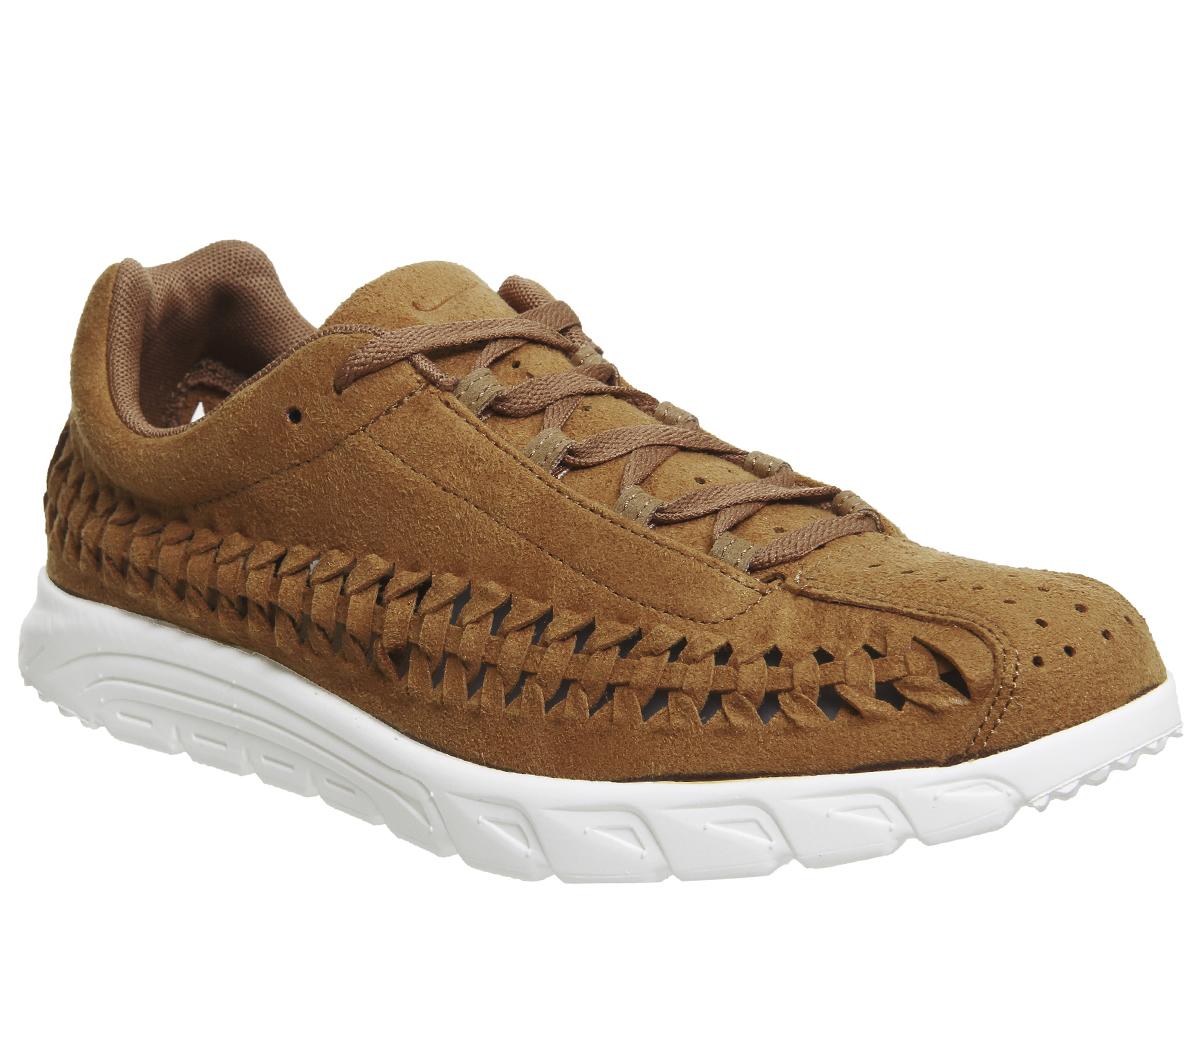 Nike Mayfly Woven Trainers Ale Brown 